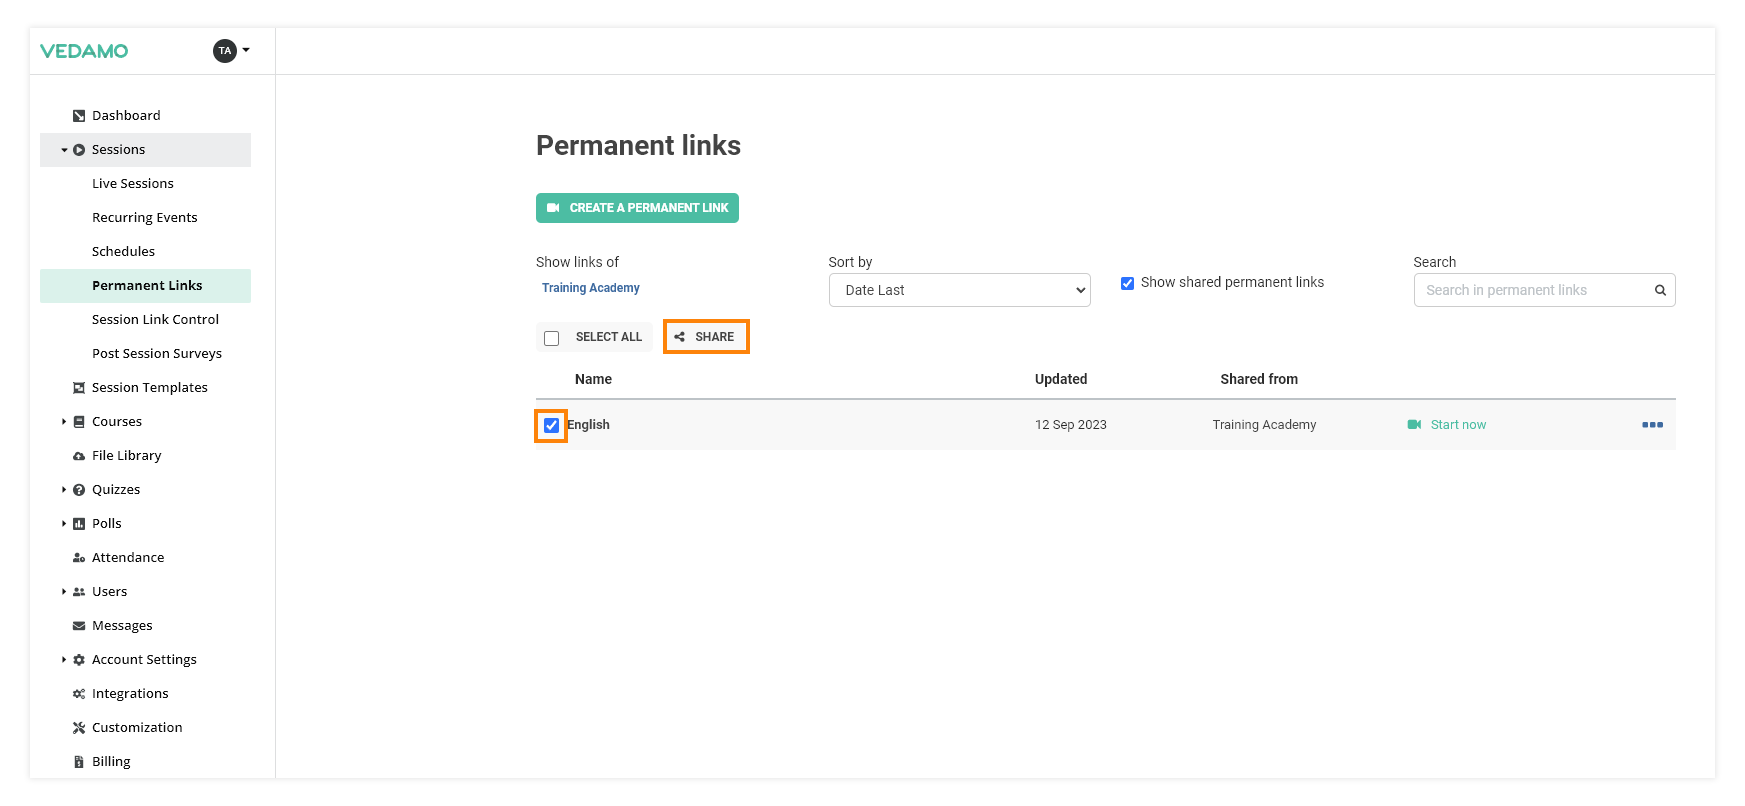 Permanent Links in the VEDAMO platform: after you have ticked the correct box next to the permanent link the share option can be used